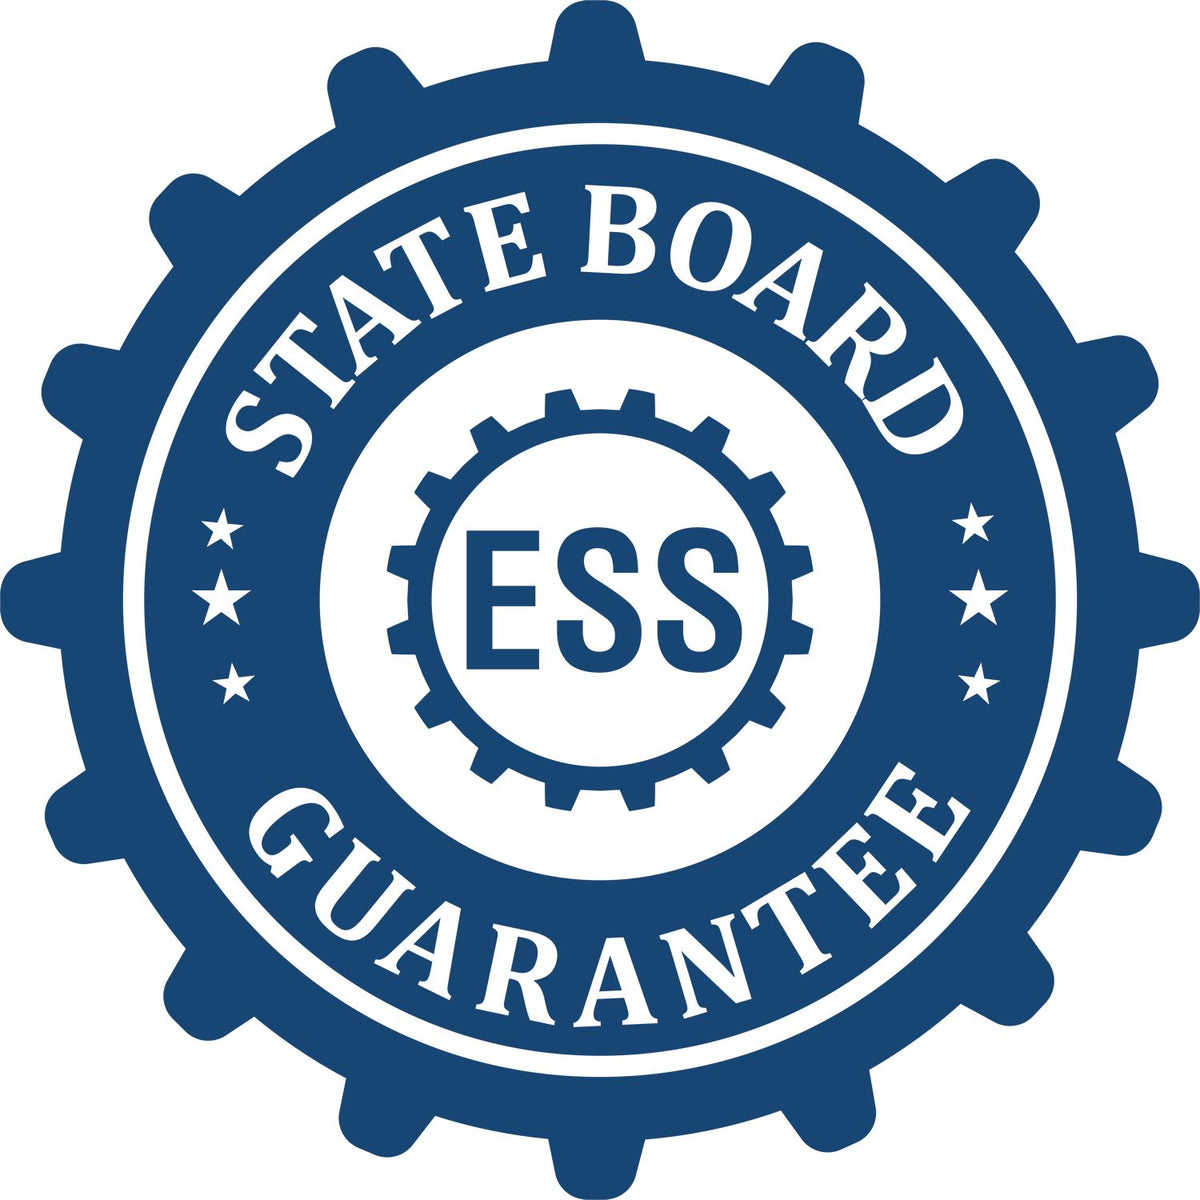 An emblem in a gear shape illustrating a state board guarantee for the Hybrid Maine Geologist Seal